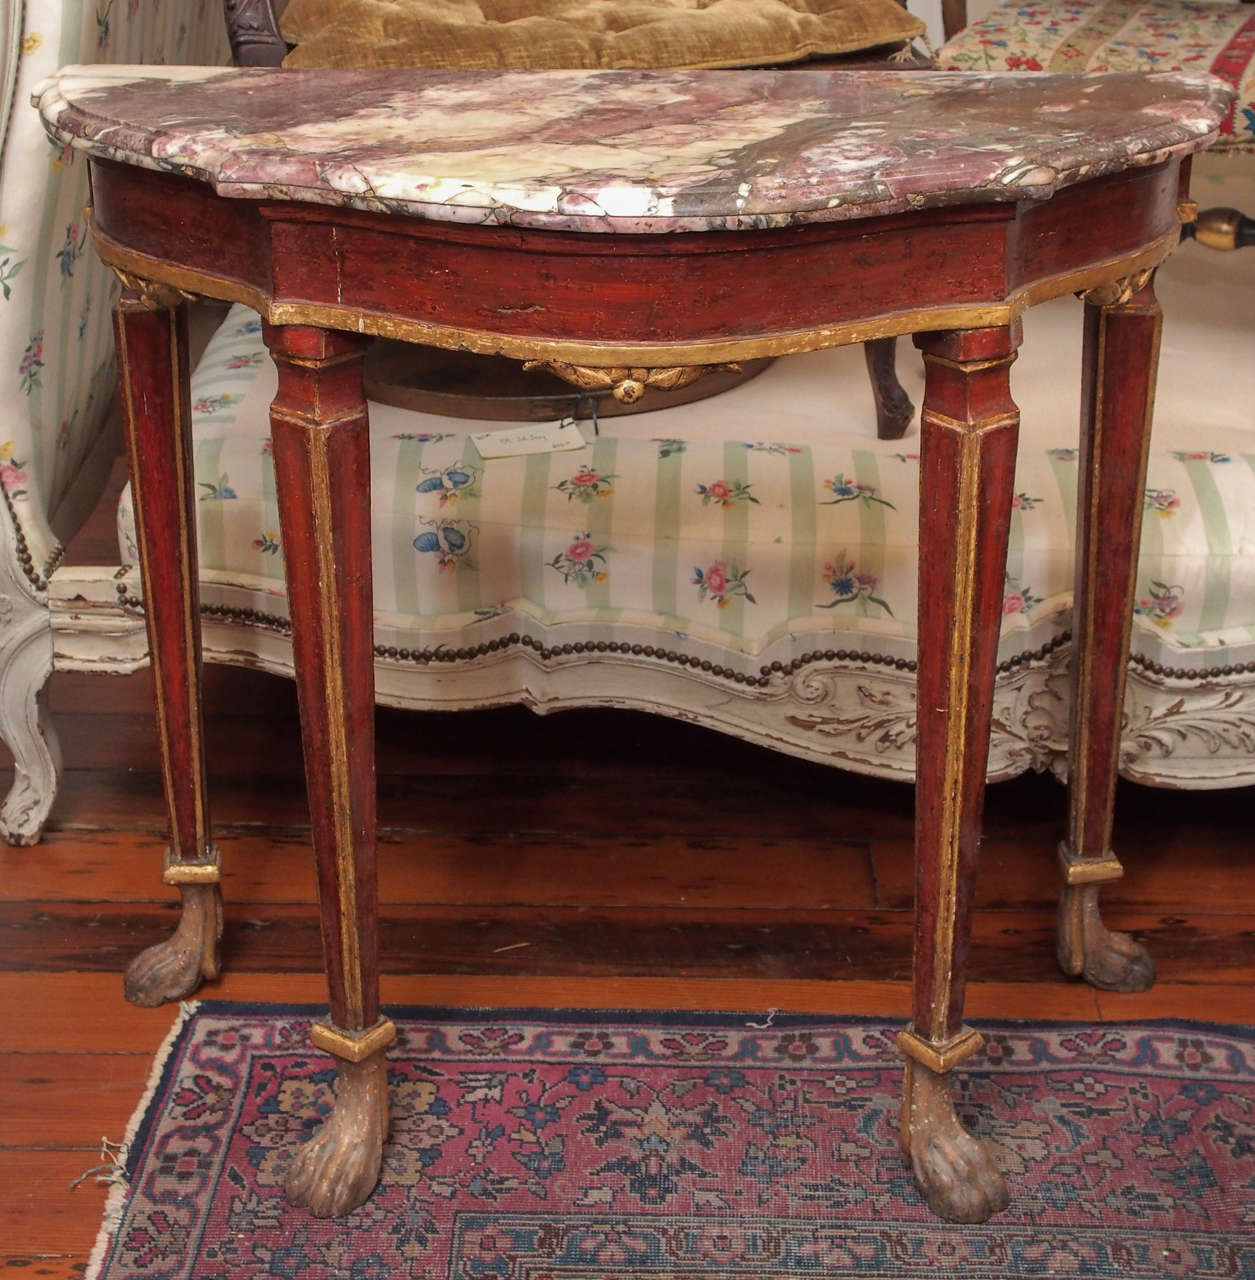 Painted and parcel gilt Console table with Marble top and four legs terminating in animal feet. In a serpentine shape.